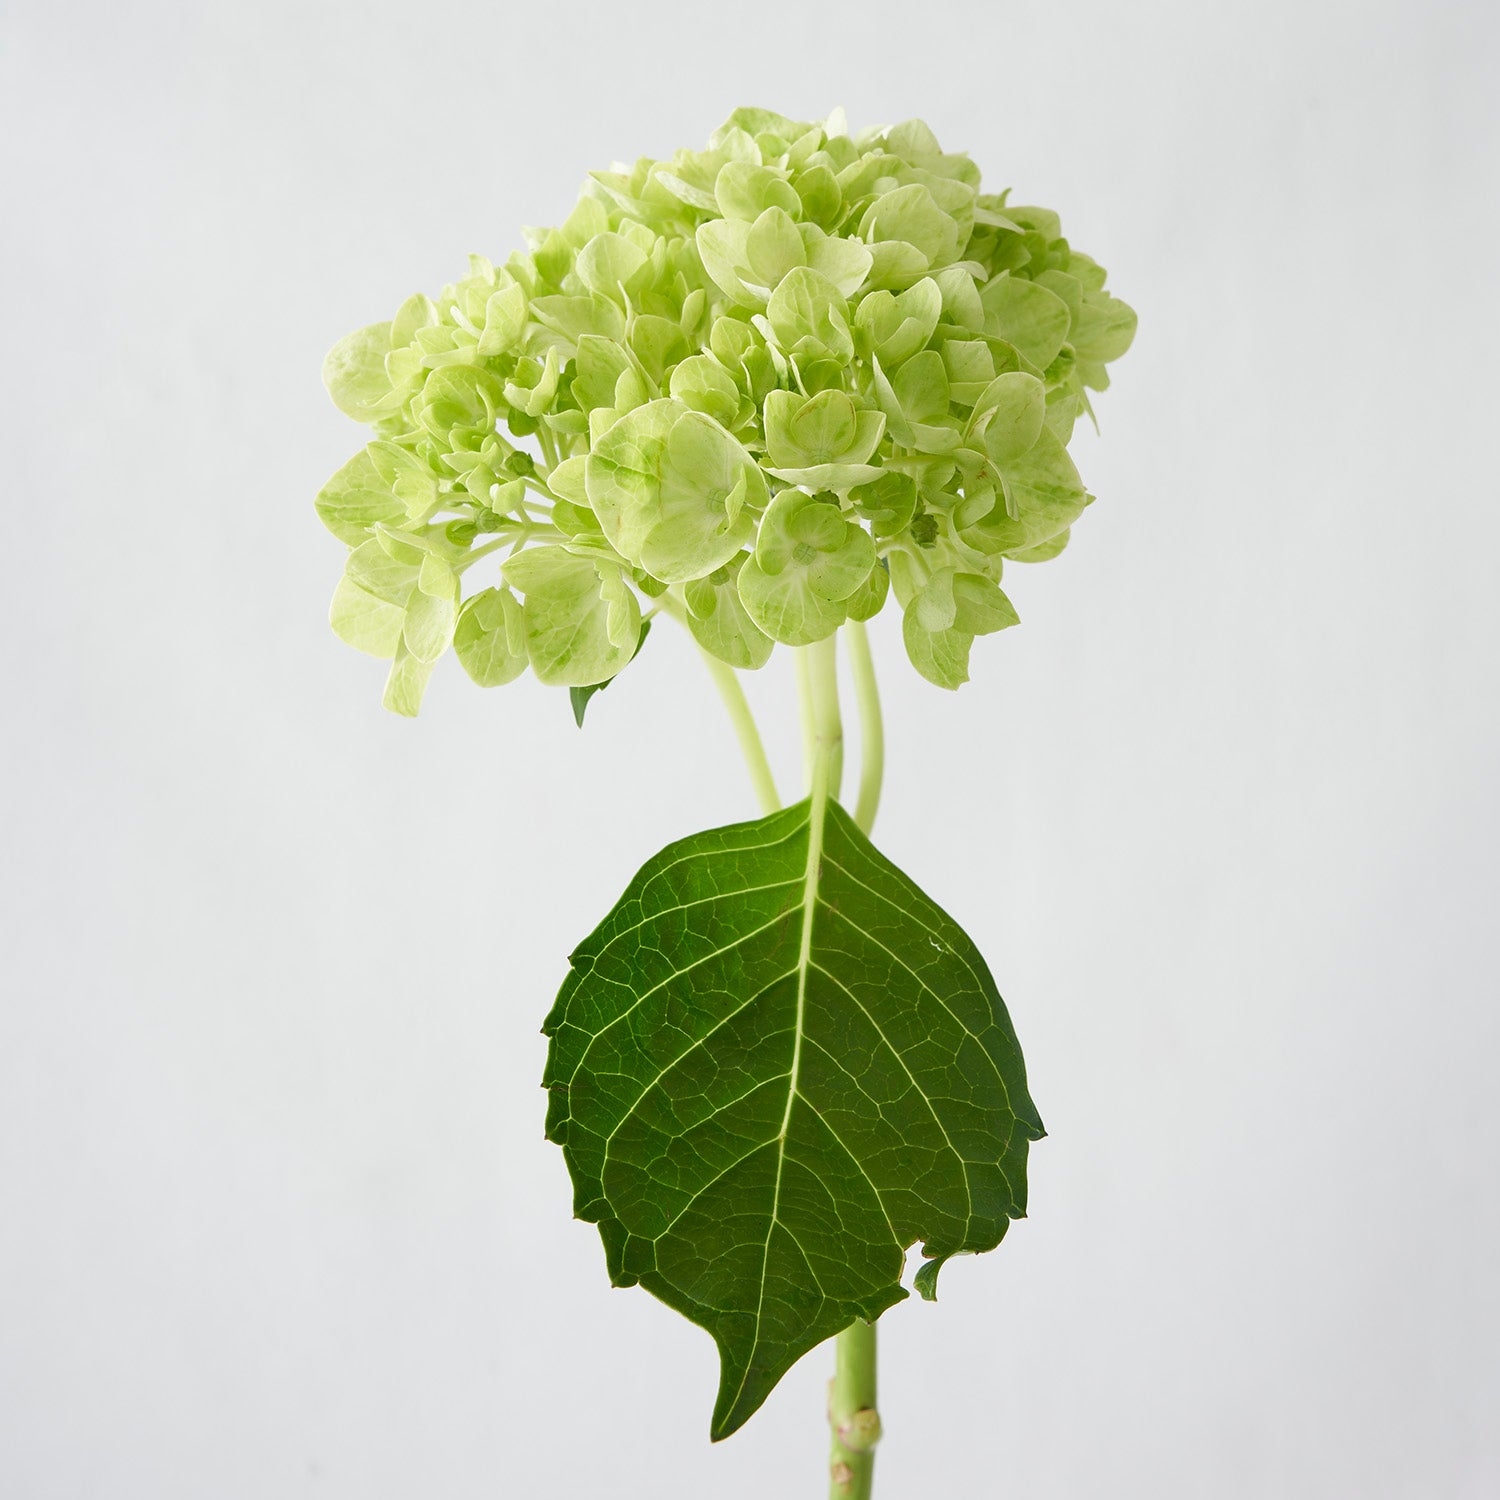 Lime green hydrangea with large leaf against white background.